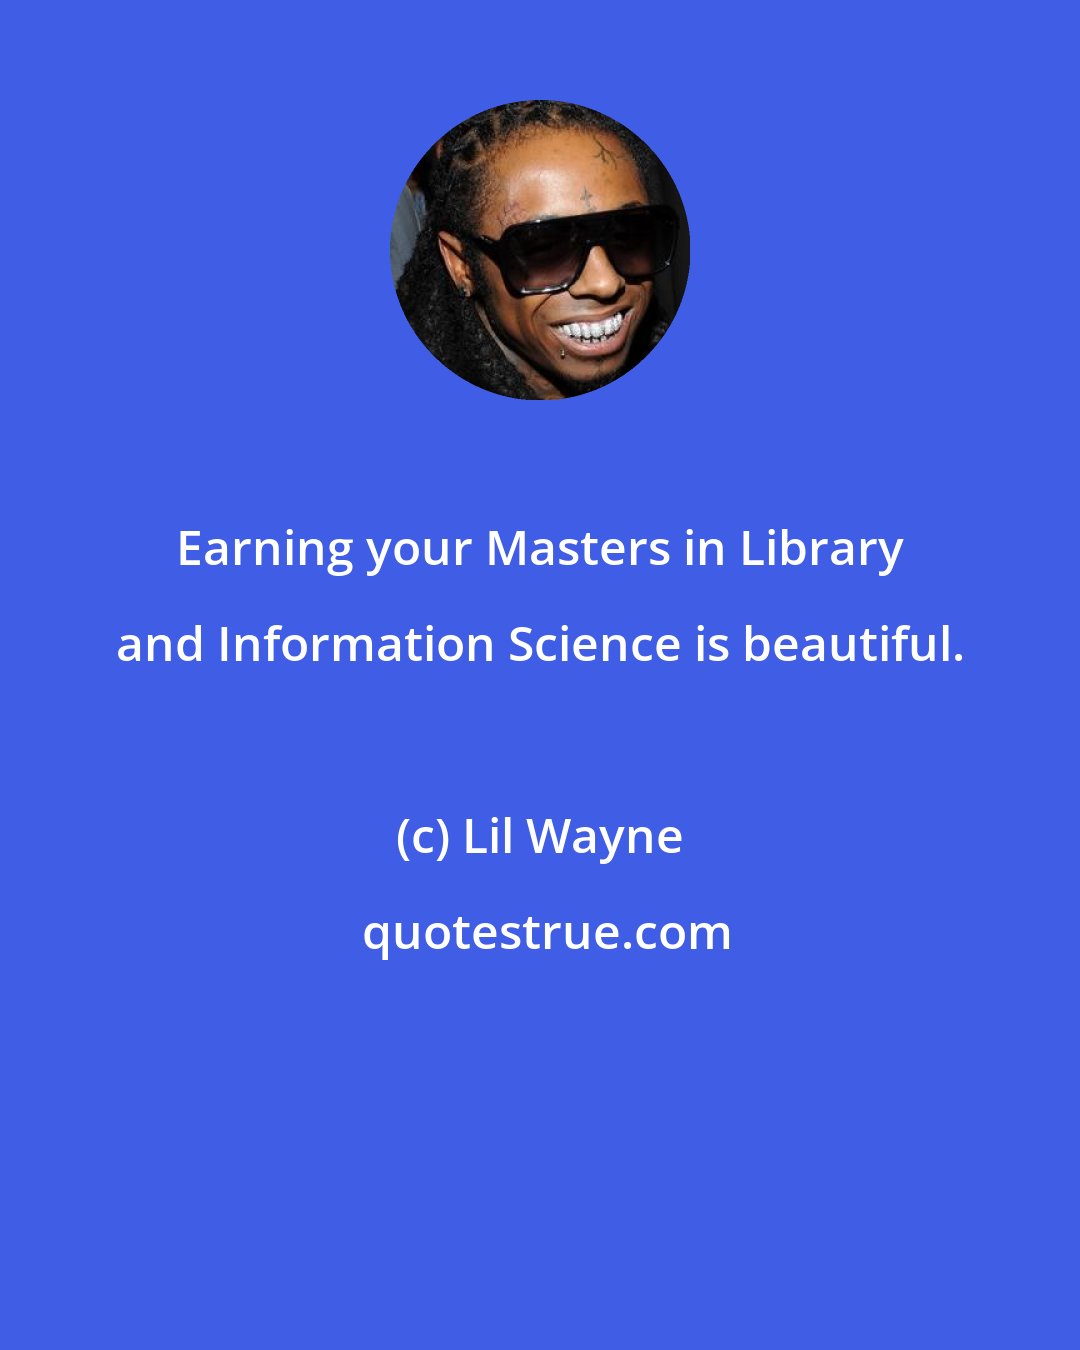 Lil Wayne: Earning your Masters in Library and Information Science is beautiful.